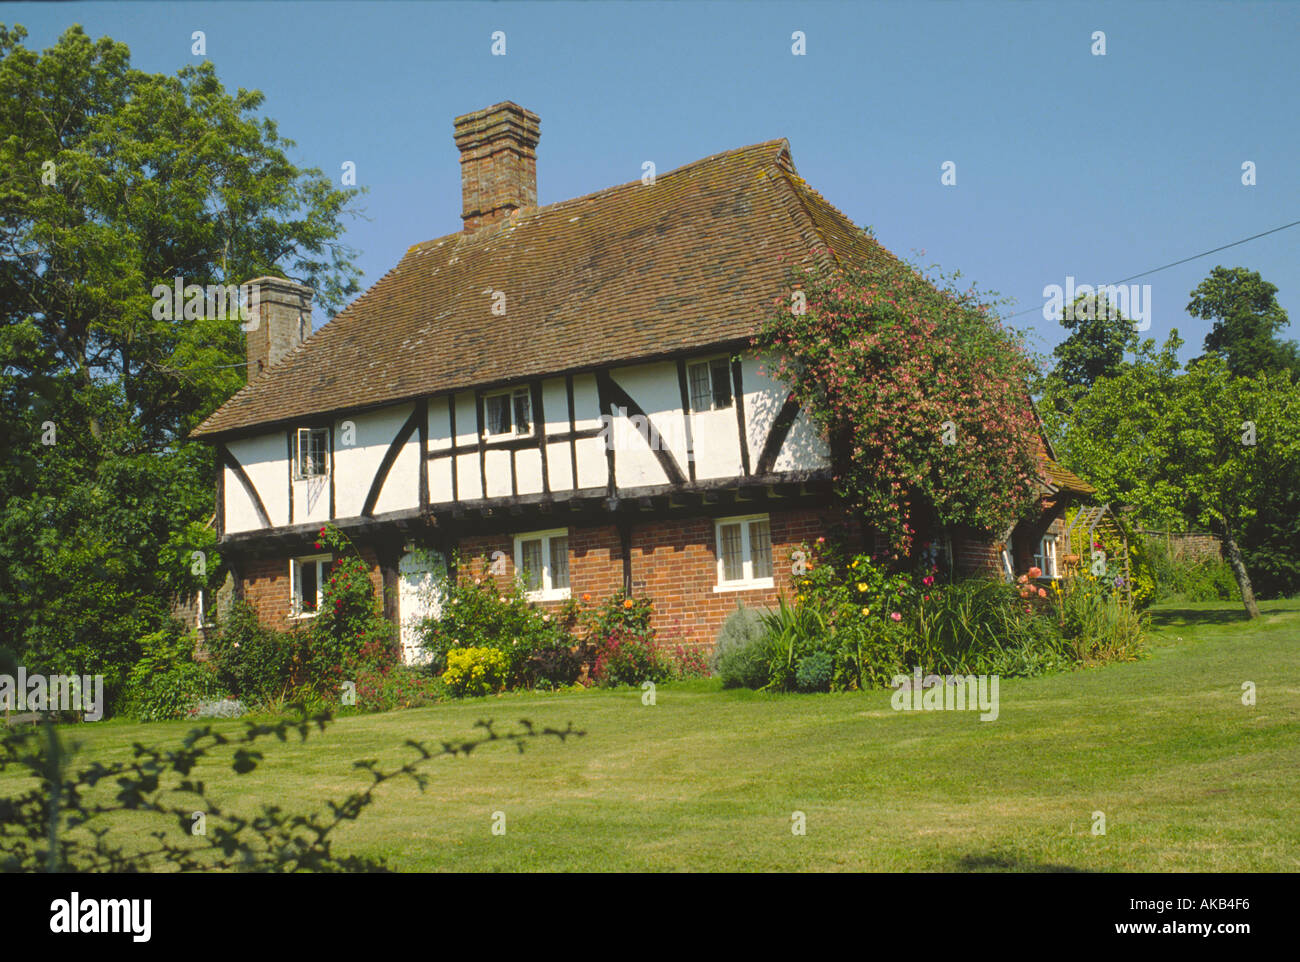 Half Timbered Cottage Nr Isfield East Sussex England Stock Photo